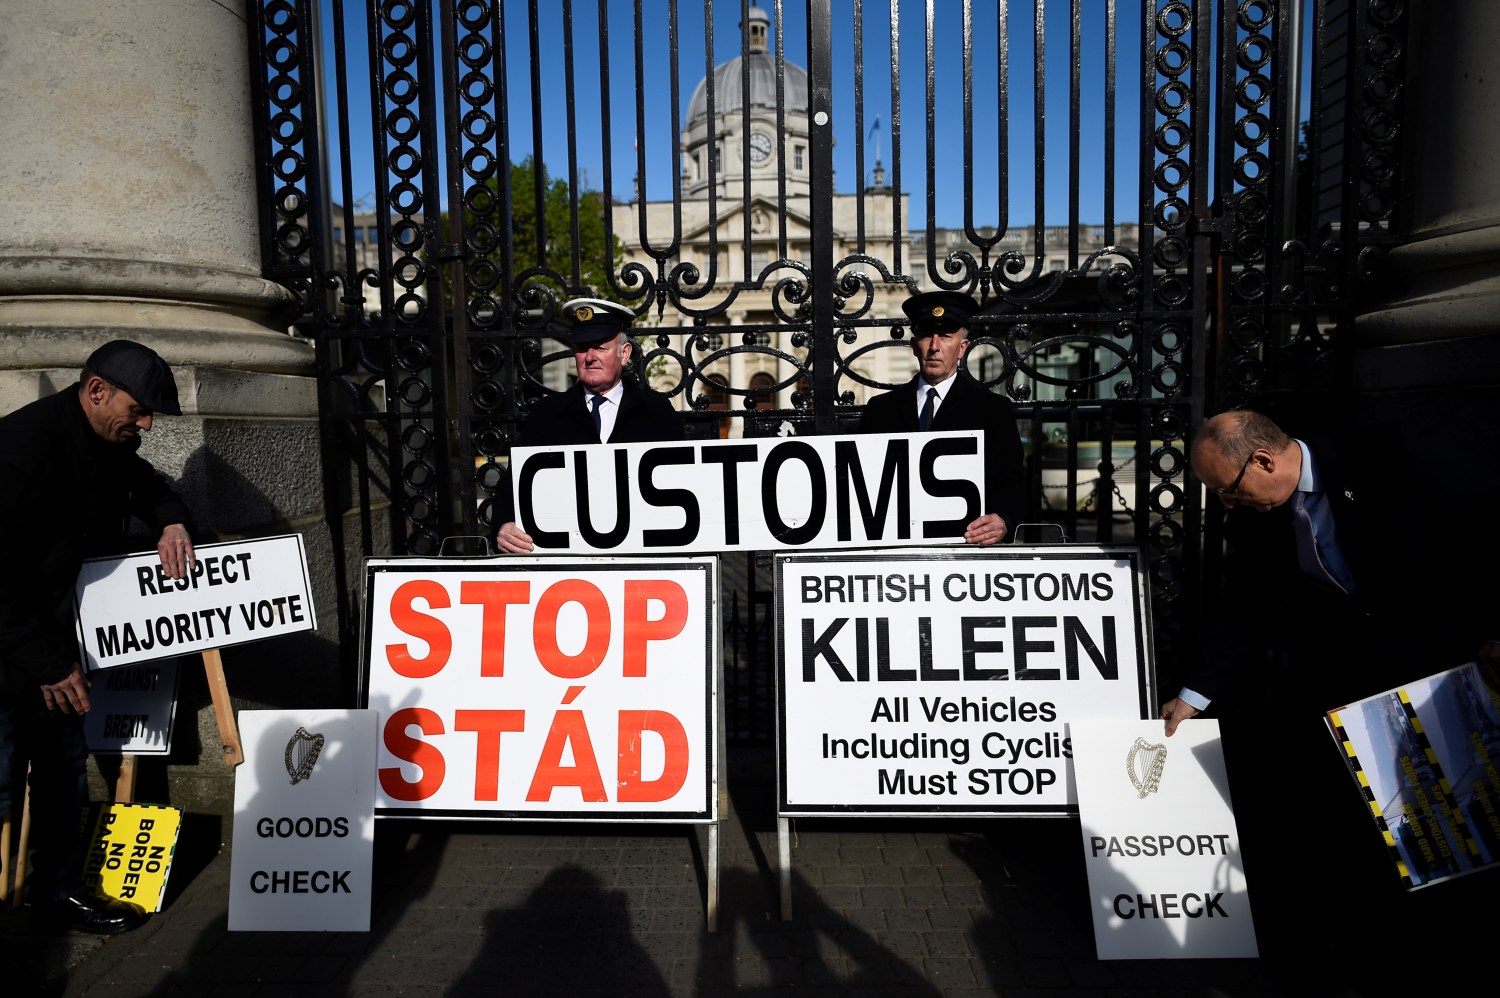 Anti-Brexit campaigners, Borders Against Brexit place placards in protest outside Irish Government buildings in Dublin, Ireland April 25, 2017. REUTERS/Clodagh Kilcoyne - RC14D205A310